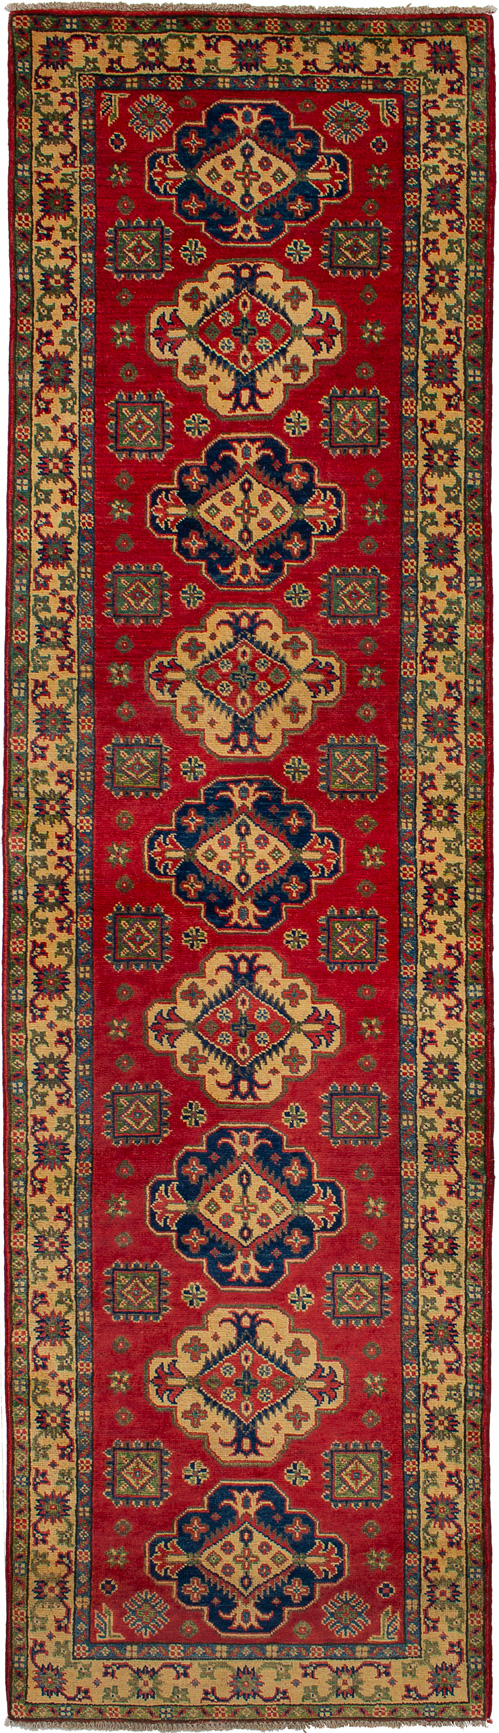 Hand-knotted Finest Gazni Red Wool Rug 2'7" x 9'8"  Size: 2'7" x 9'8"  